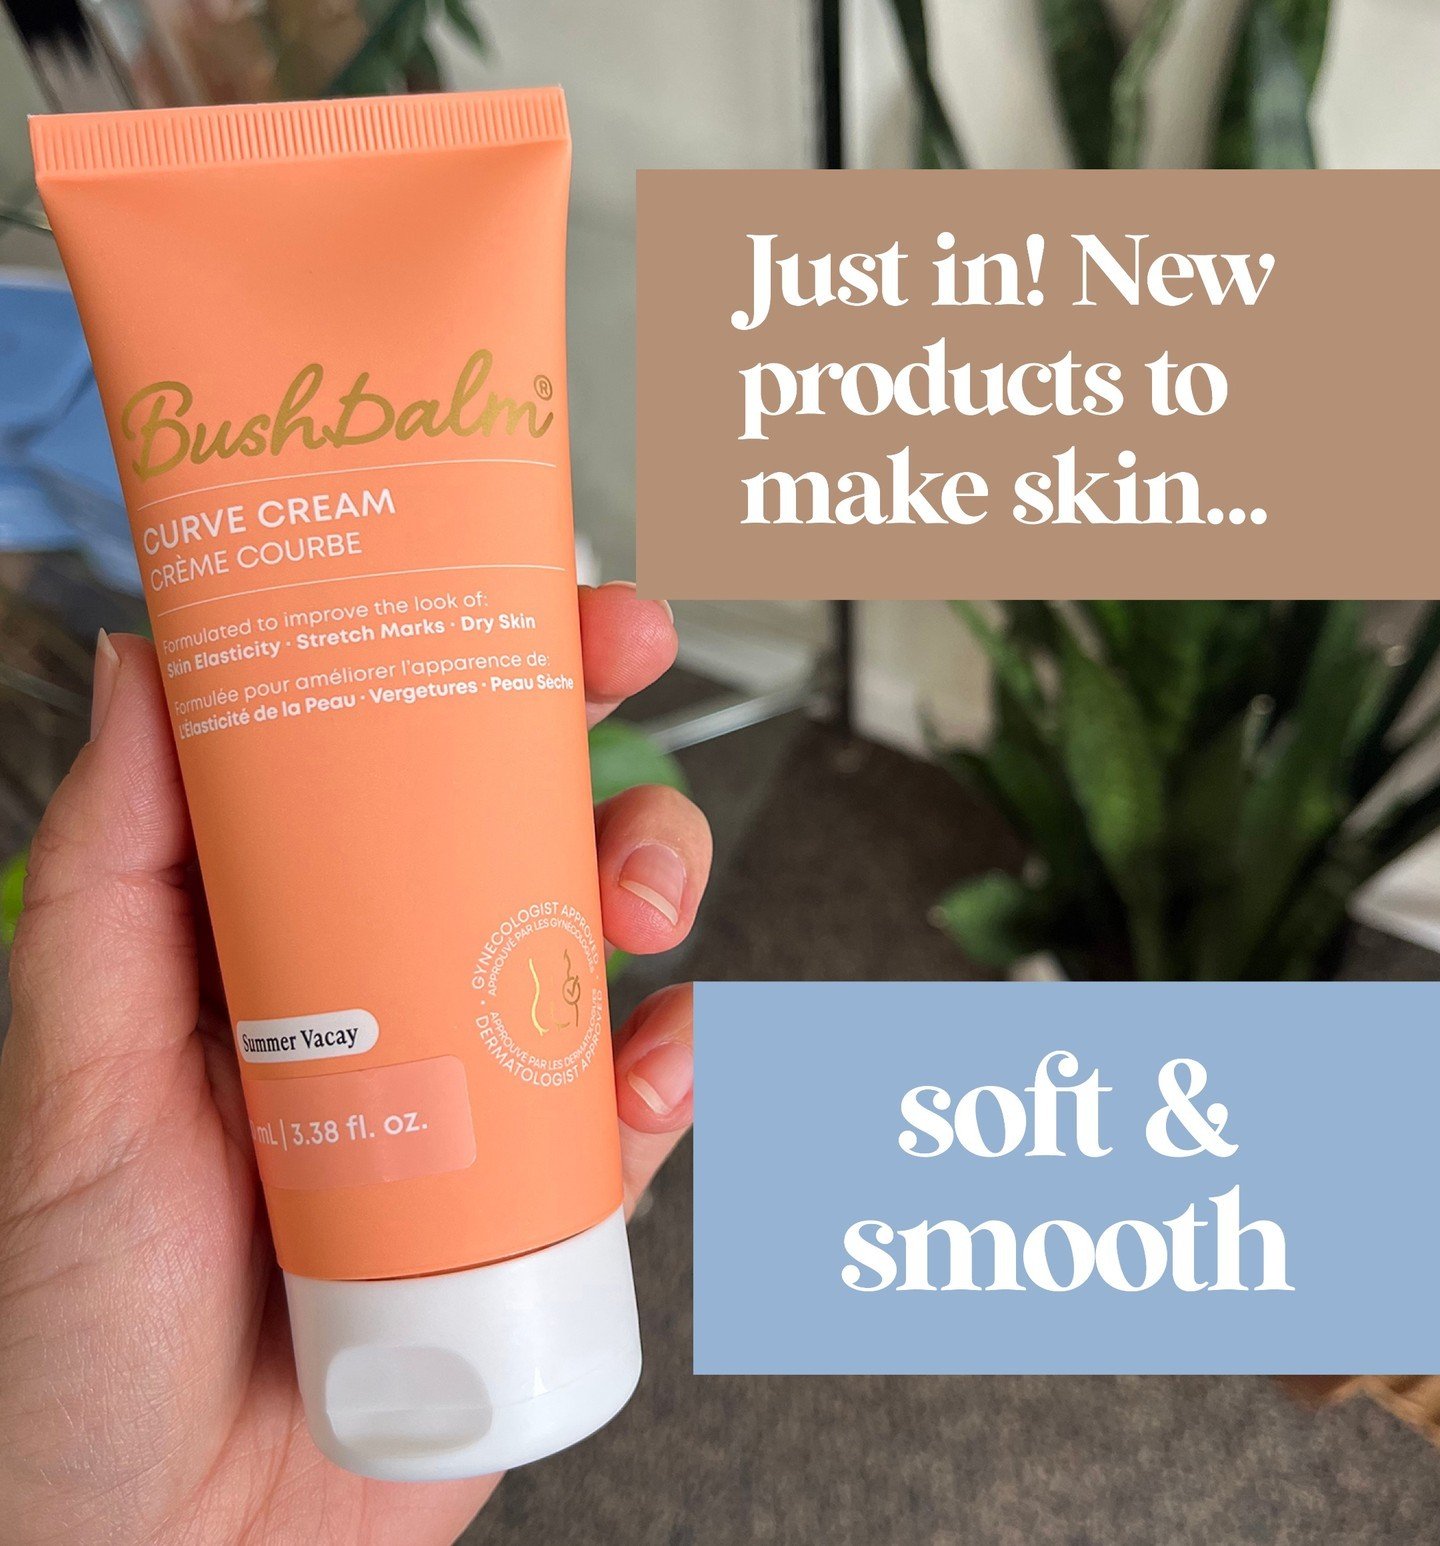 New products in the salon for soft, smooth skin&ndash; just in time for summer. Stop in and shop this Sunday 9-4. #skincare #bushbalm #smallbusiness